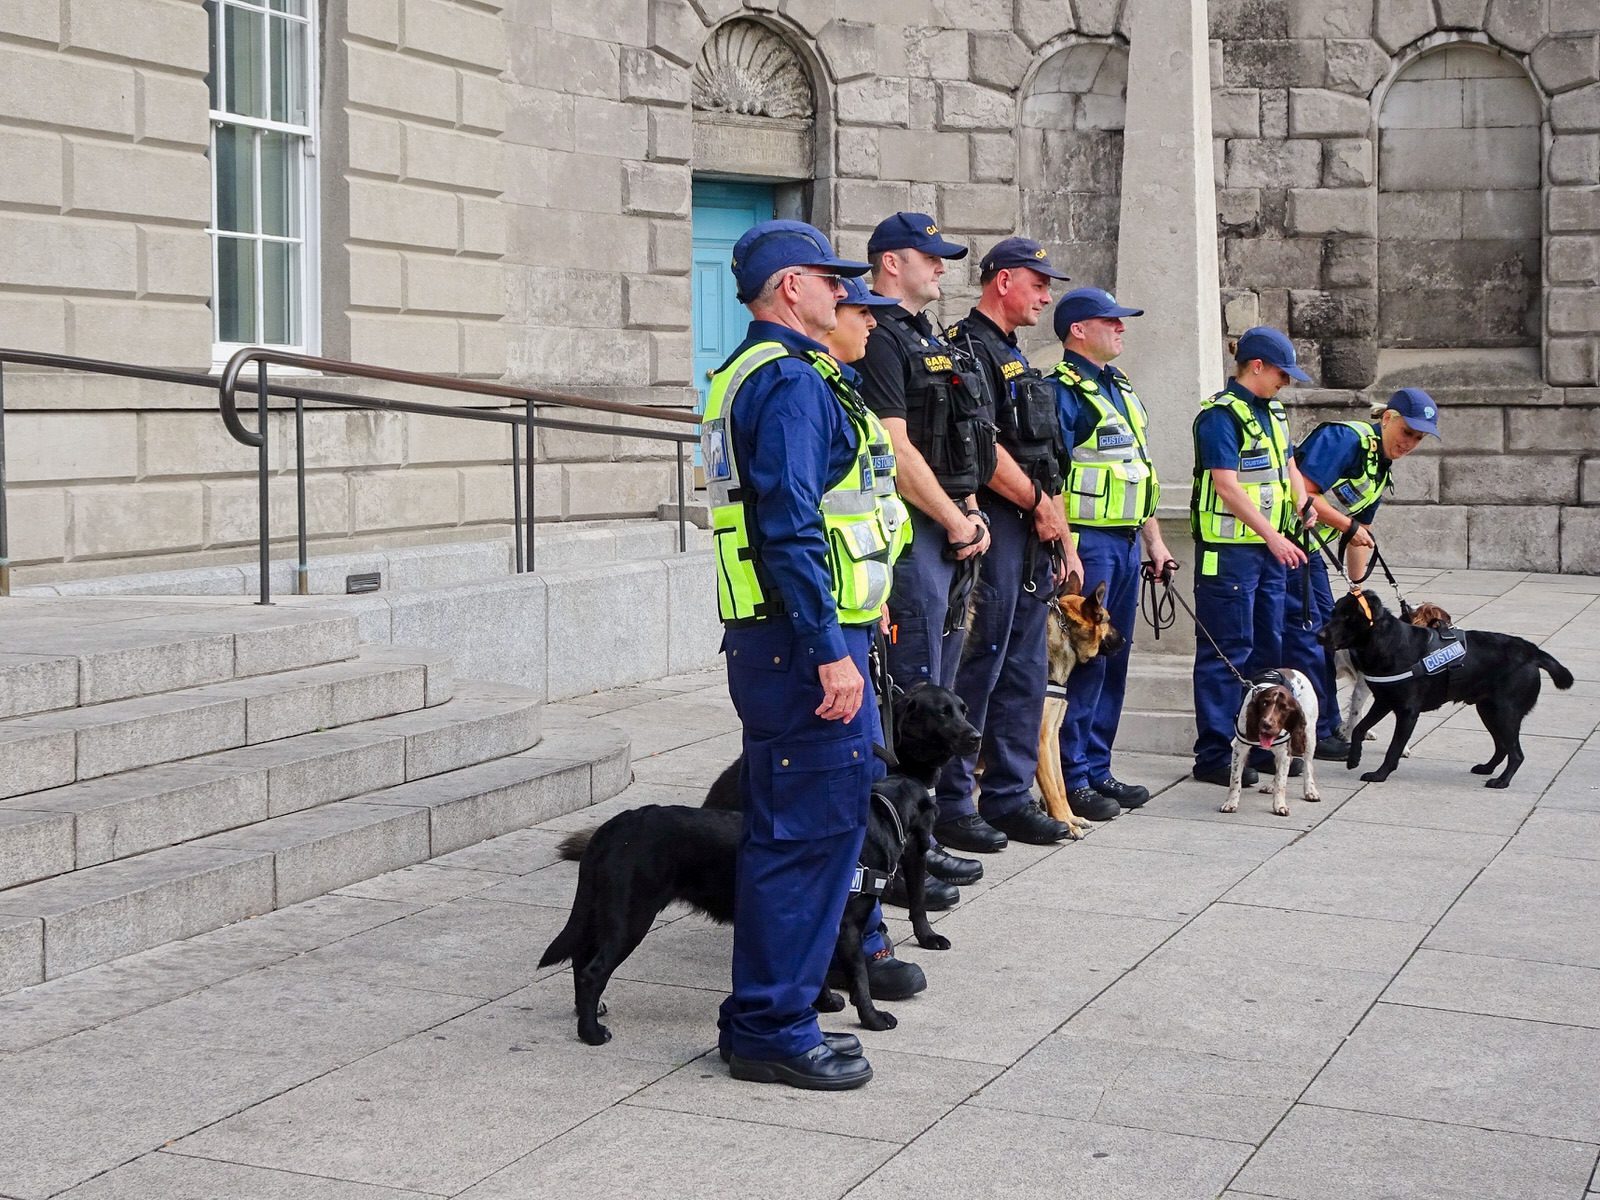 THE DOGS WHO WORK FOR THE IRISH CUSTOMS SERVICE [INVITED THE PRESS TO A PHOTO-SHOOT]-225736-1